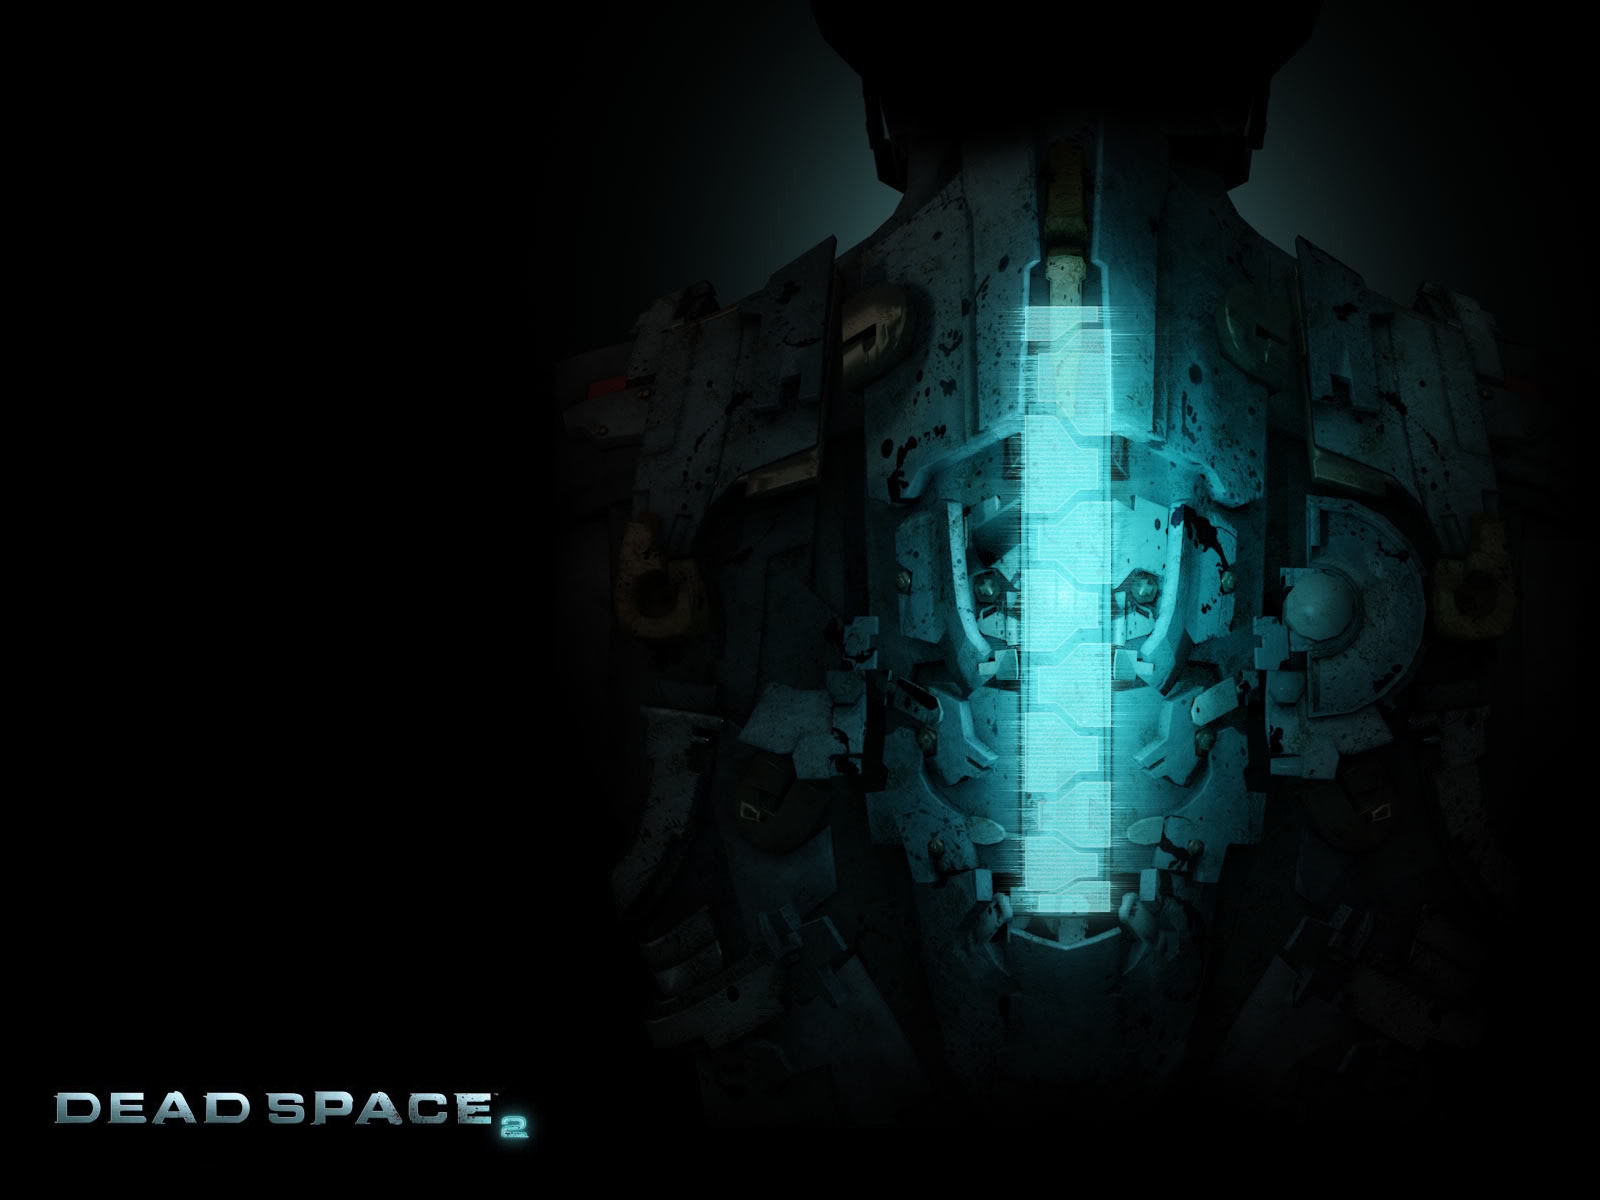 Dead Space 2 Art for 1600 x 1200 resolution